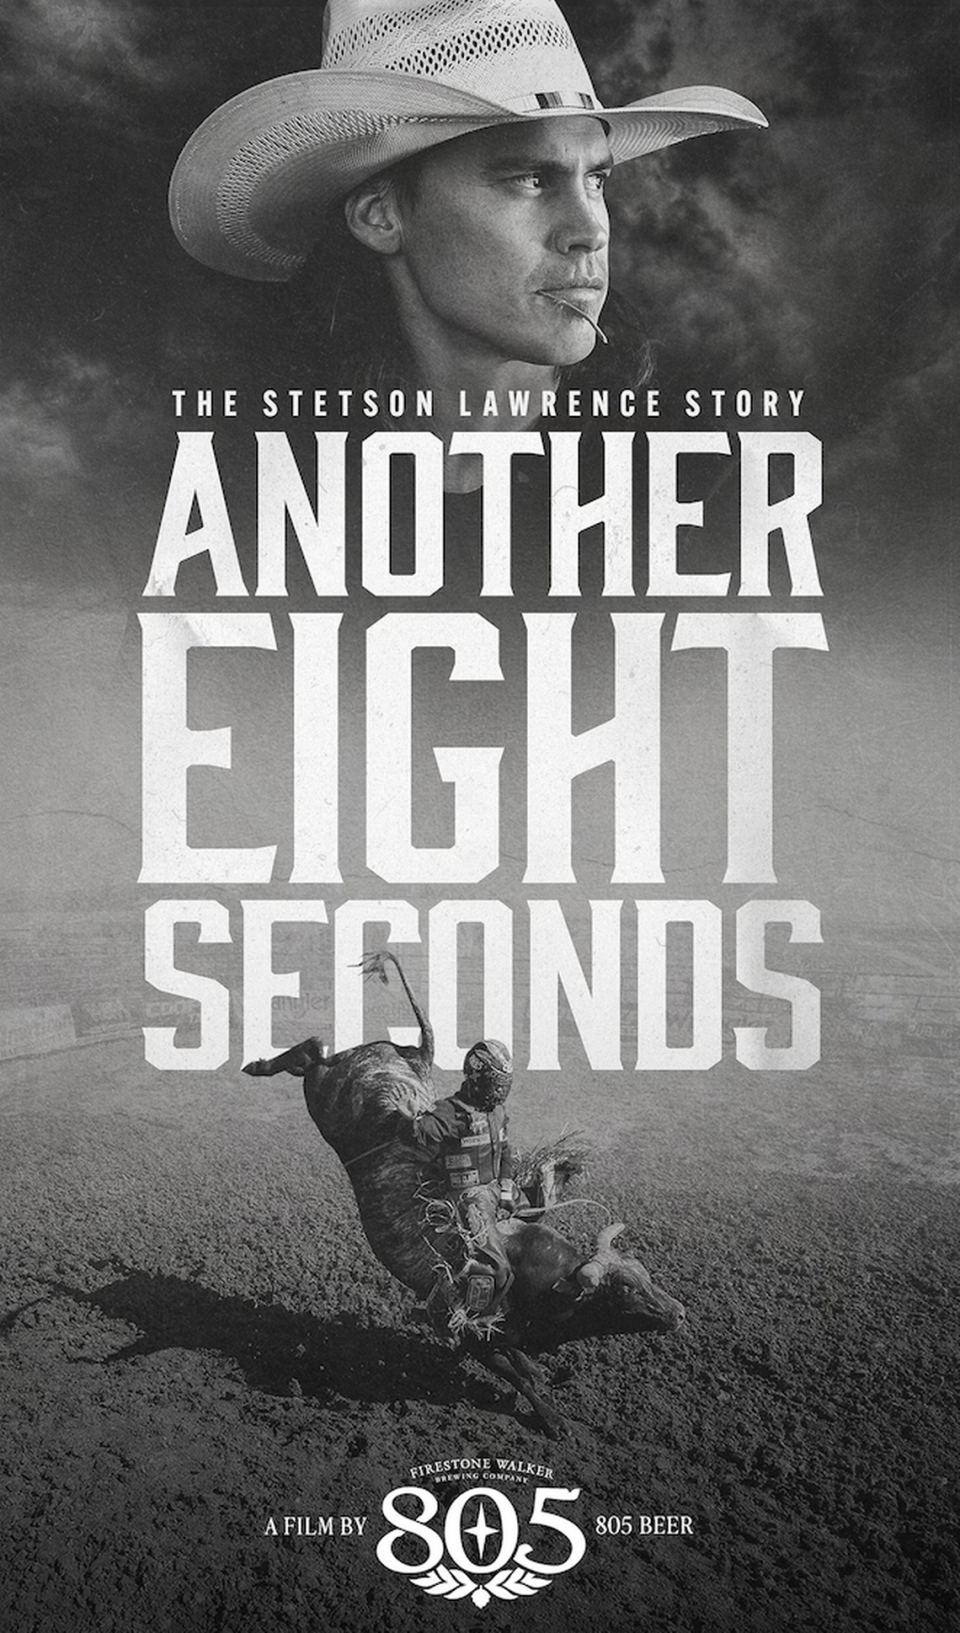 Professional bull rider Stetson Lawrence is the subject of the documentary film, “Another Eight Seconds”. Firestone Walker Brewing Company